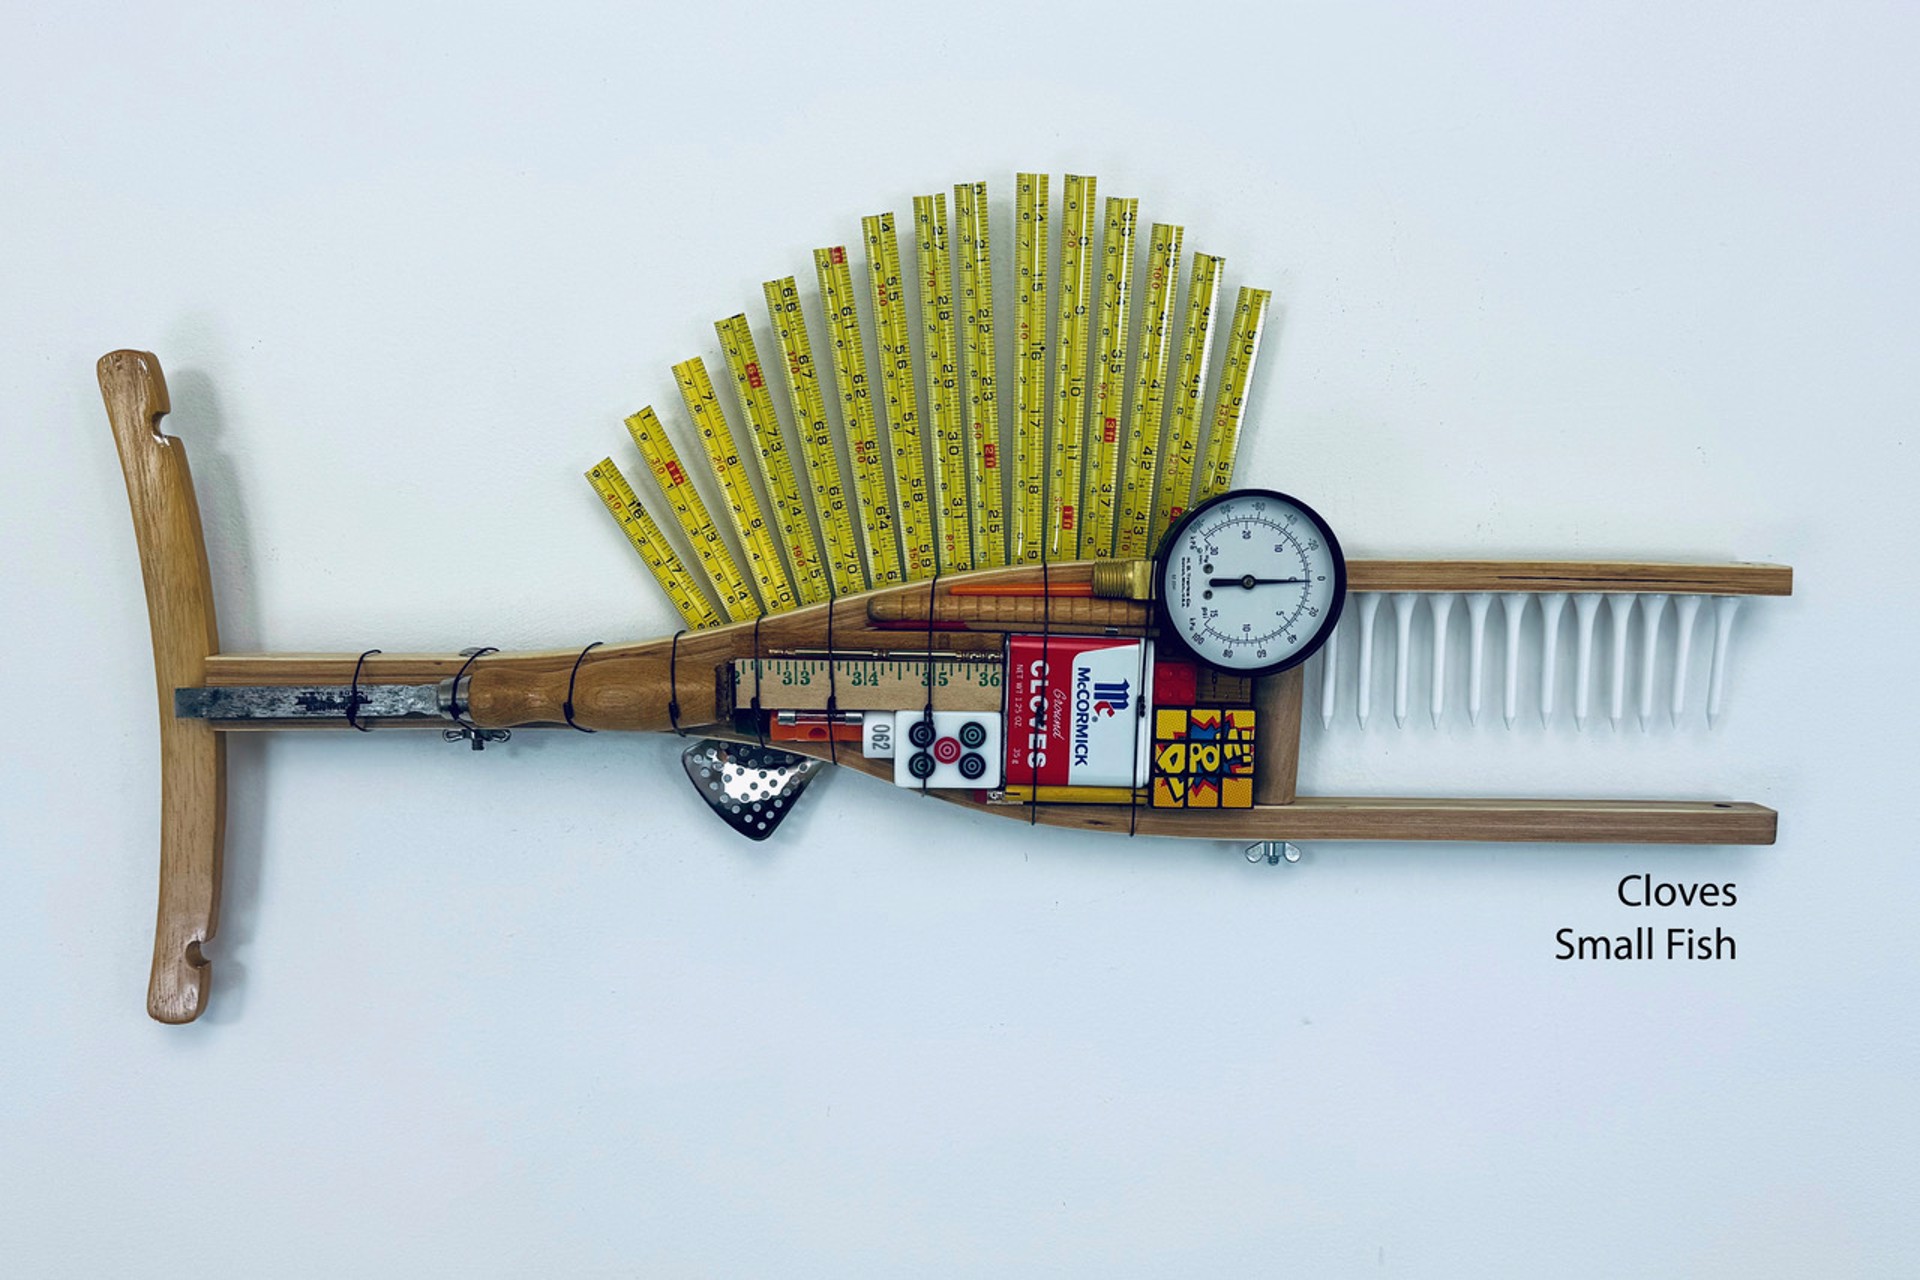 Cloves, Small Fish (yellow tape measure fin) by Stephen Palmer